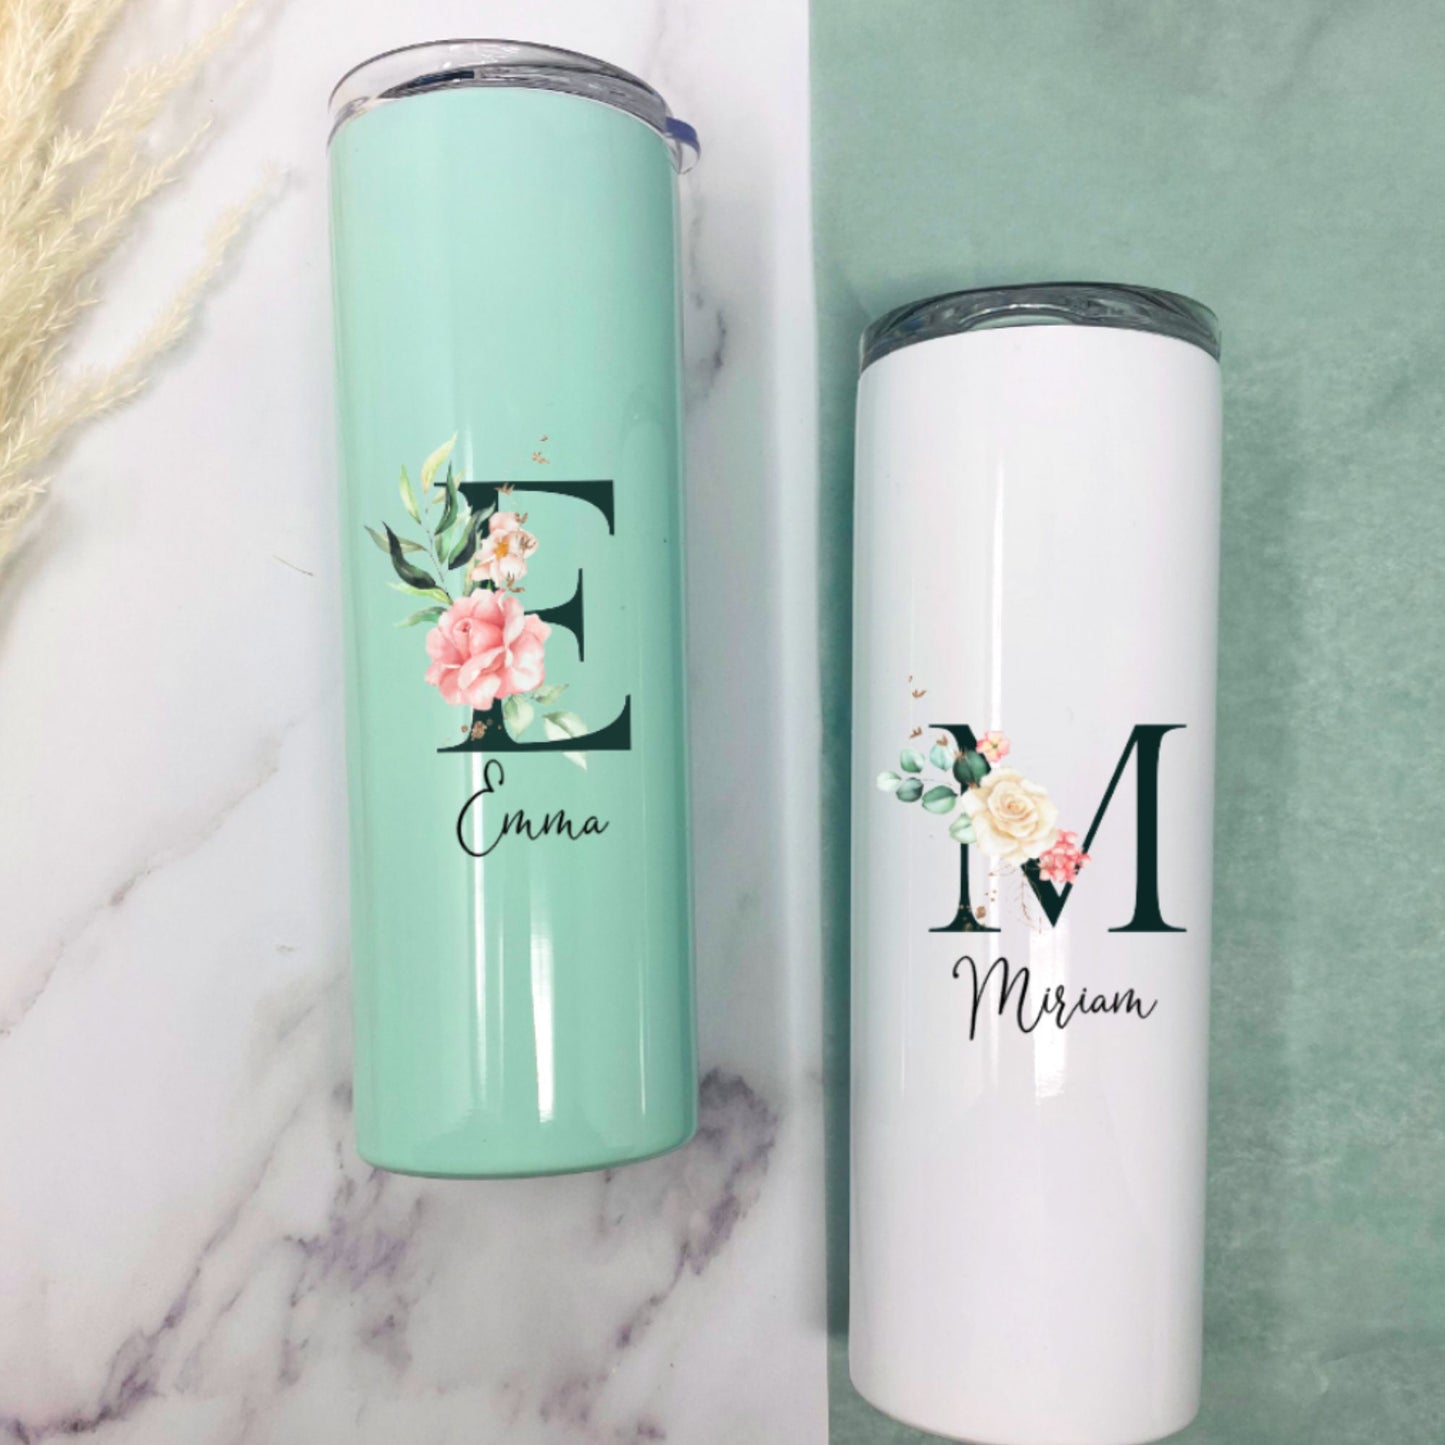 Großer Thermobecher to Go personalisiert - weiß oder mint - florales Initial - Design PEONY T2